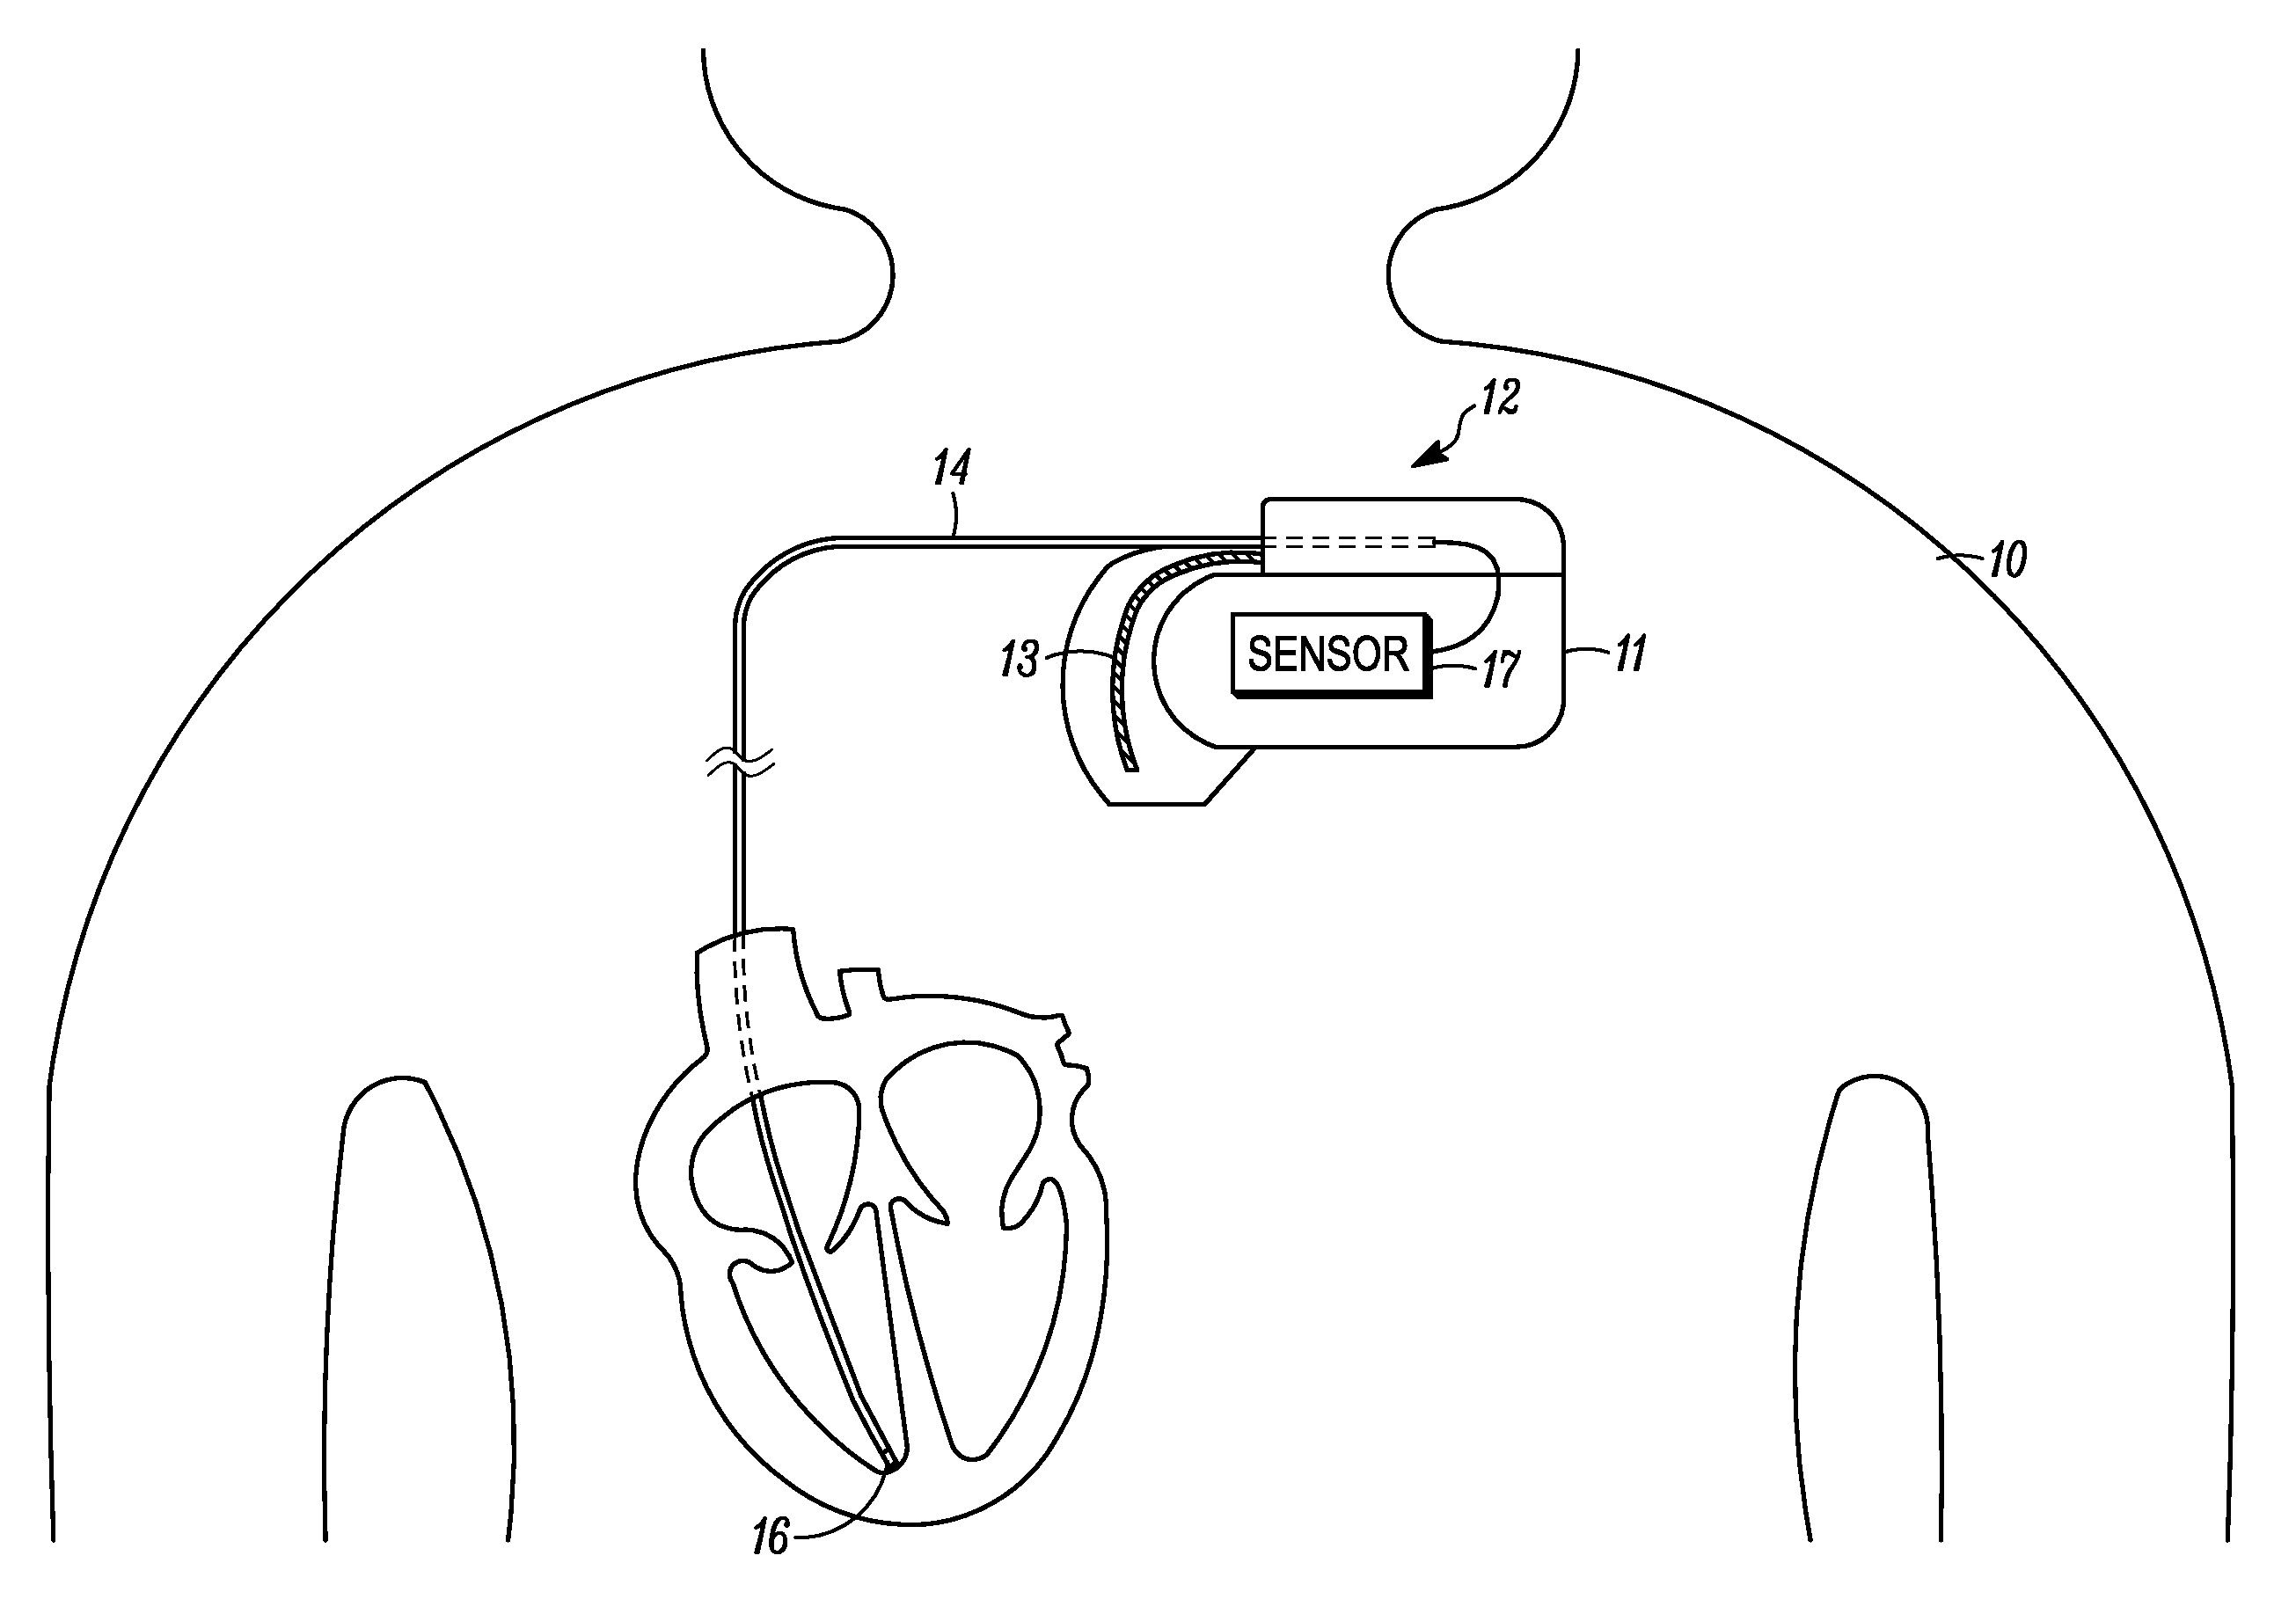 Implantable medical device with wireless communications